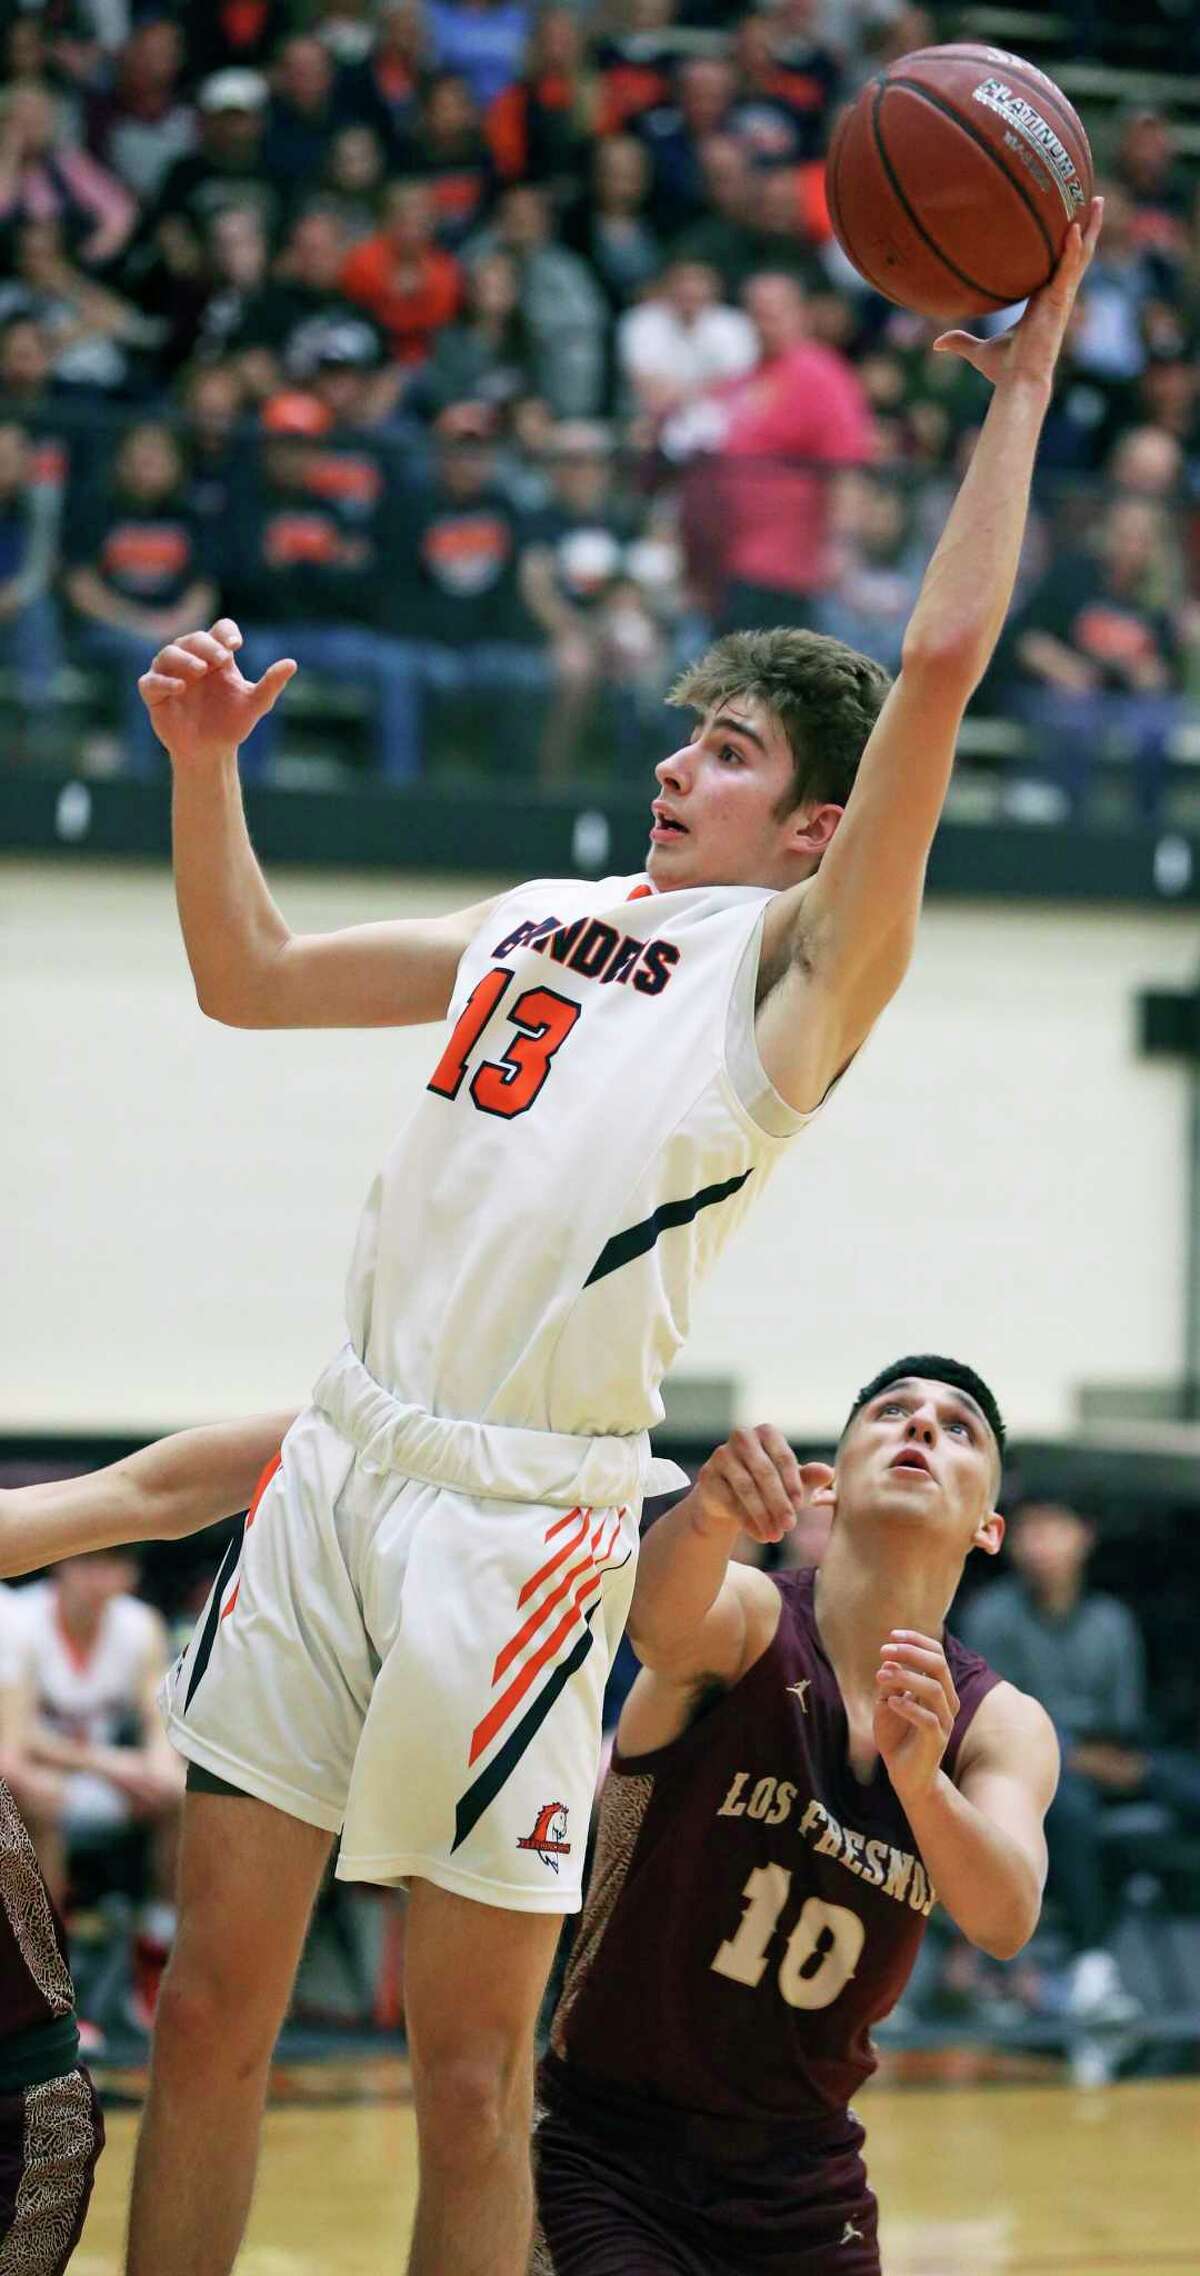 Tanner Brown claims a rebound for the Broncos as Brandeis plays Los Fresnos on Class 5A regional semifinal basketball at Littleton Gym on Feb. 6, 2020.